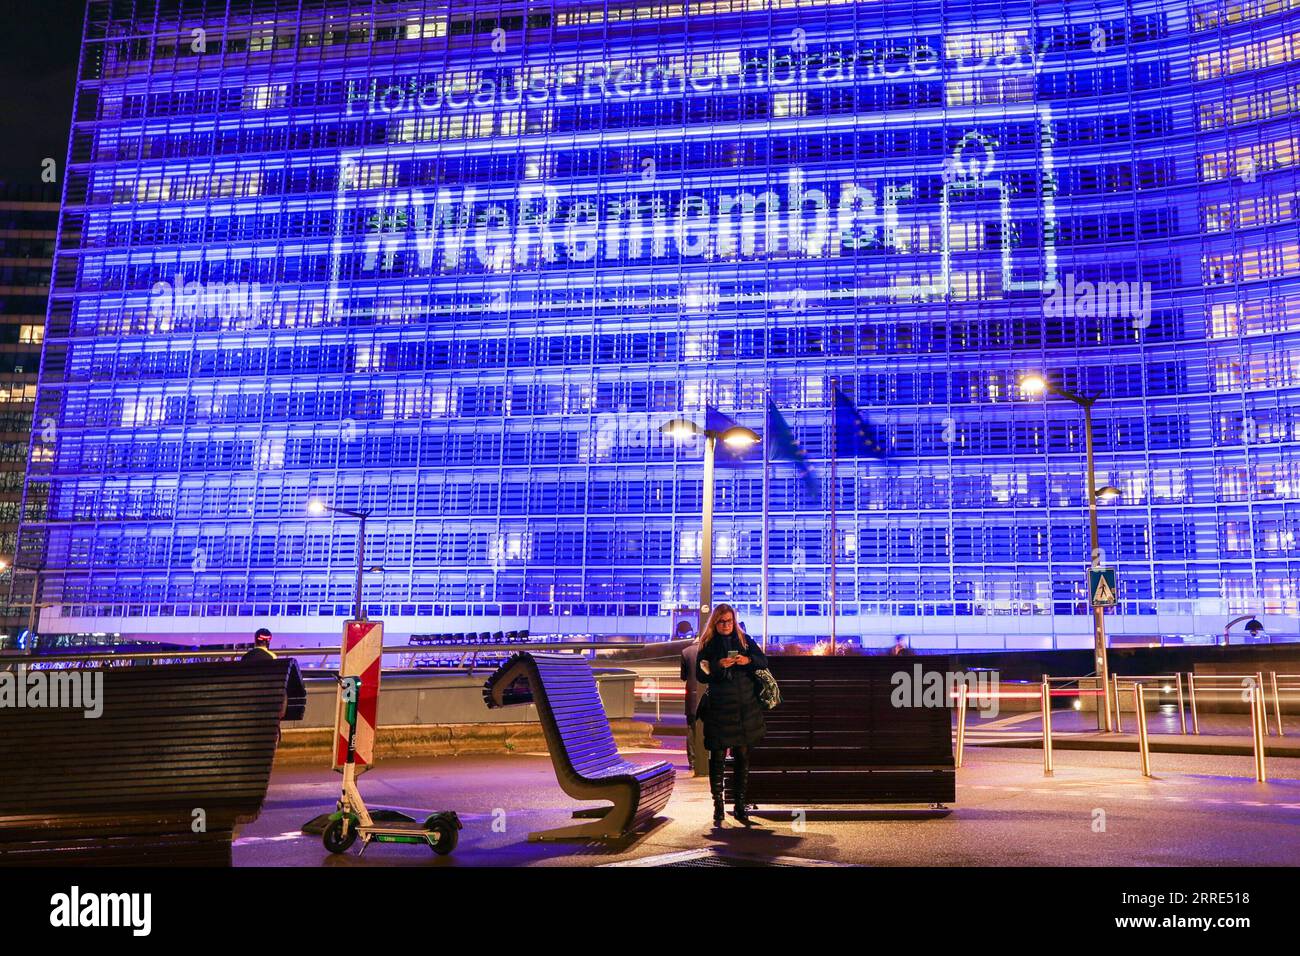 220127 -- BRUSSELS, Jan. 27, 2022 -- The building of European Commission is illuminated as part of the International Holocaust Remembrance Day activities in Brussels, Belgium, Jan. 27, 2022. International Holocaust Remembrance Day is a global memorial day on Jan. 27 designated by the United Nations in 2005 to commemorate the genocide that occurred during World War II.  BELGIUM-BRUSSELS-INTERNATIONAL HOLOCAUST REMEMBRANCE DAY-ILLUMINATION ZhengxHuansong PUBLICATIONxNOTxINxCHN Stock Photo